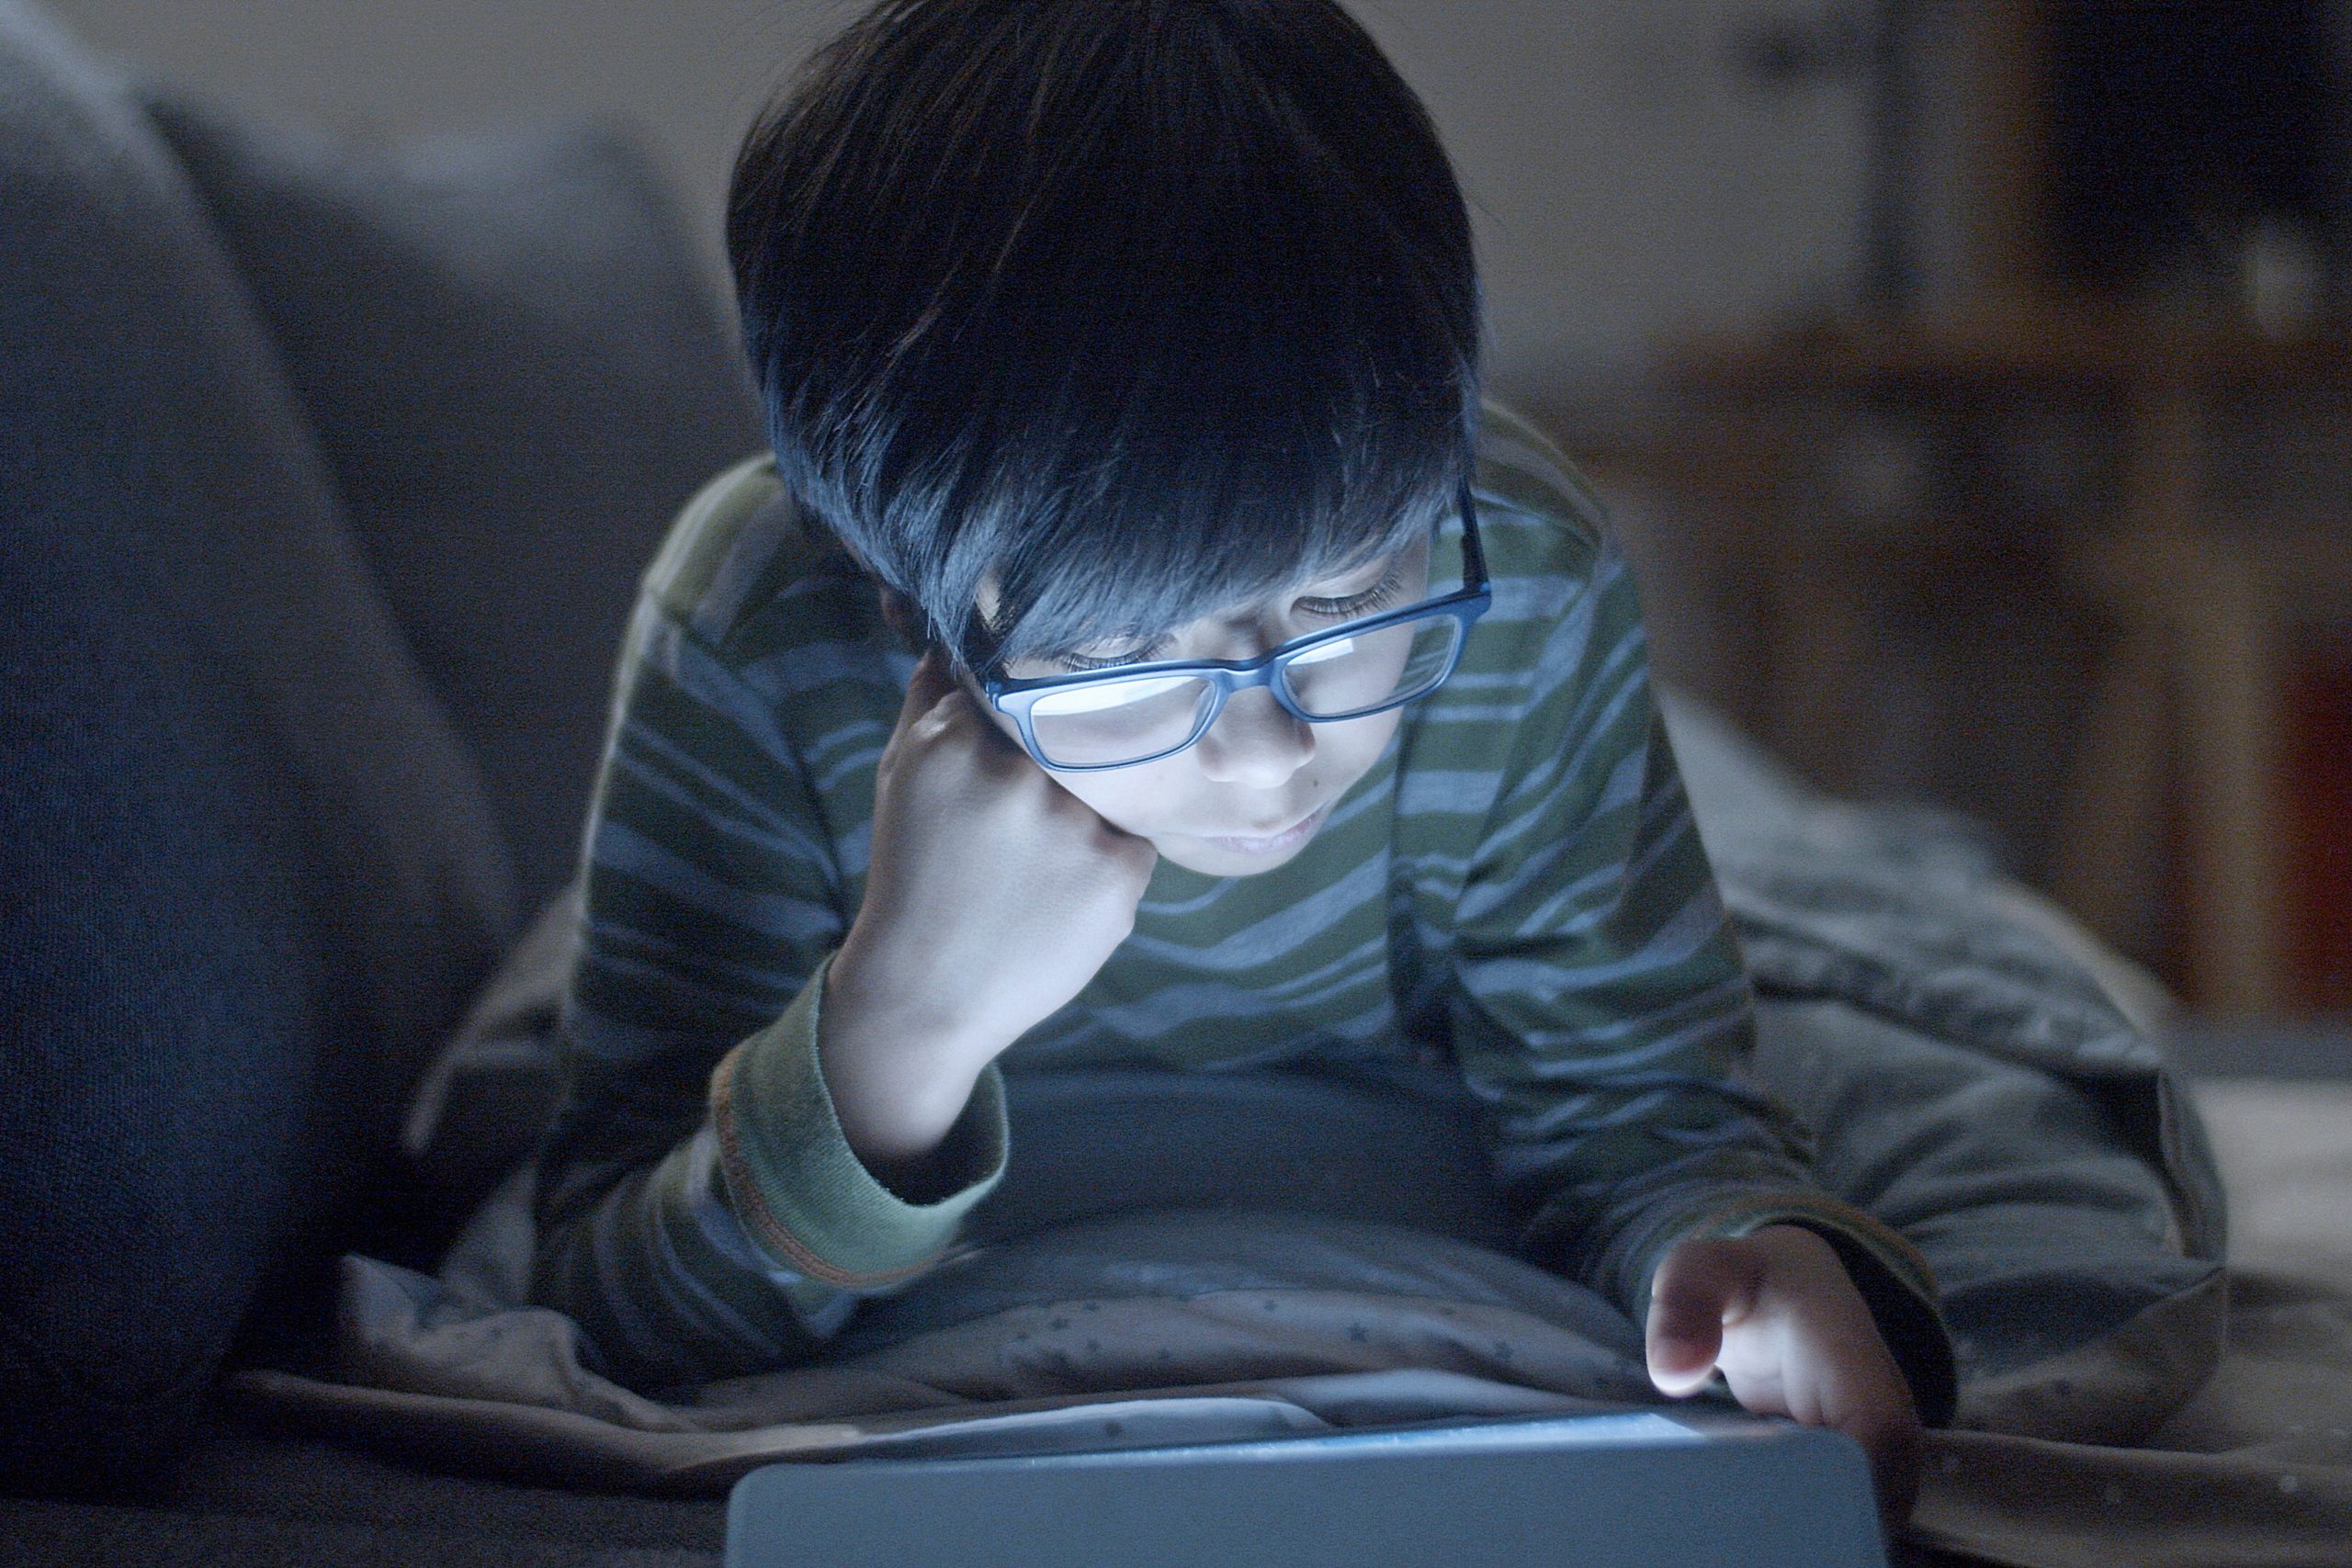 Why Are Children So Obsessed With Tablet or iPad Games?